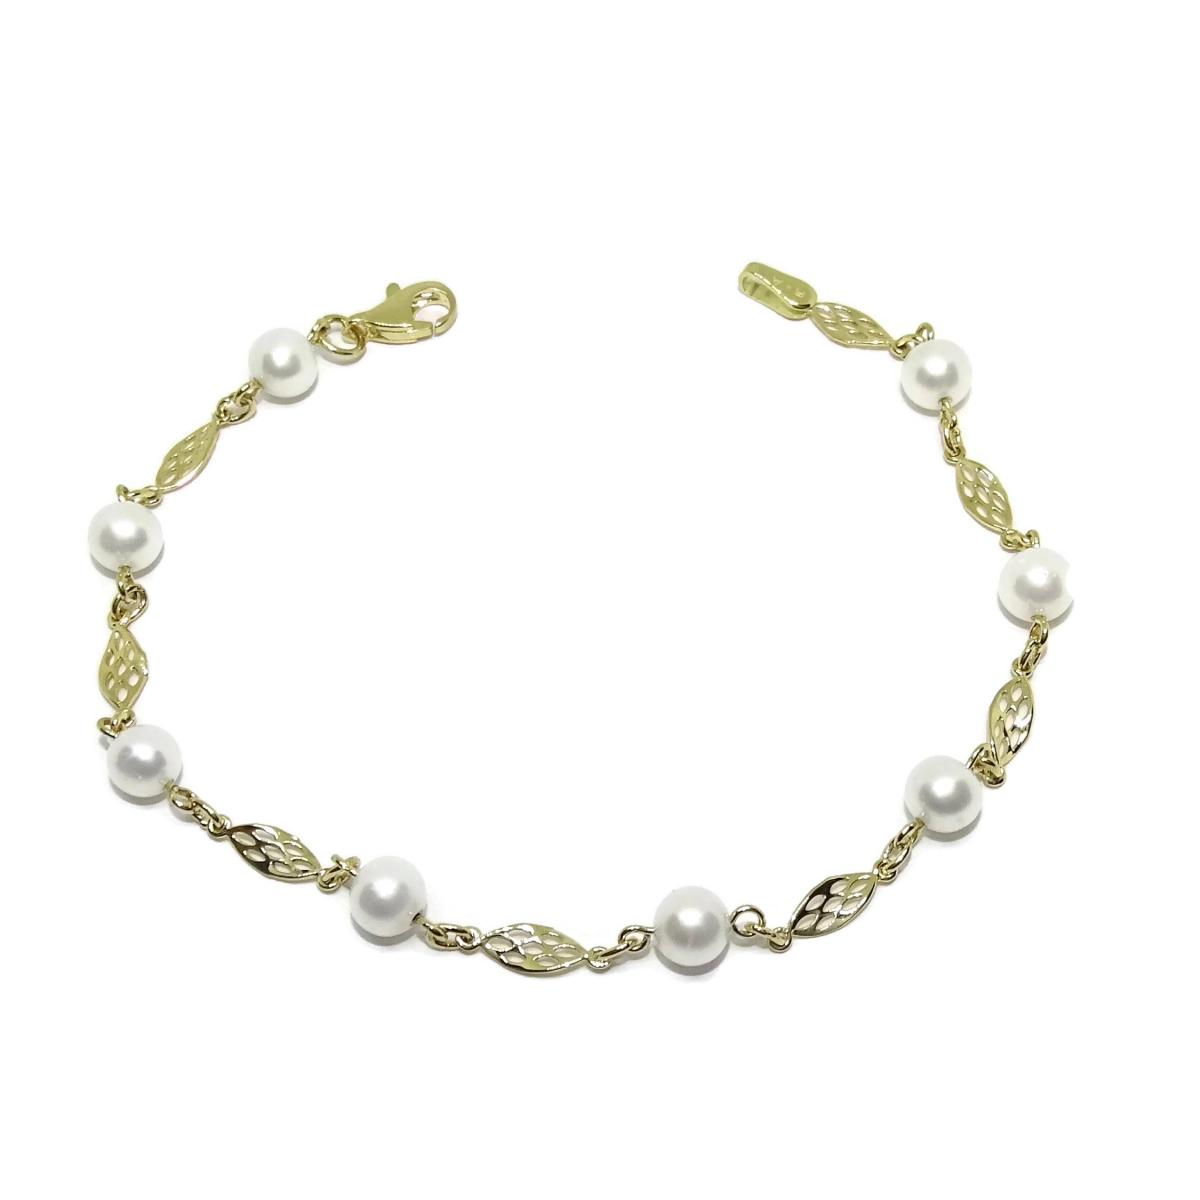 BRACELET 18K YELLOW GOLD SPECIAL COMMUNITY�N ESLAB�N FILIGREE AND 8 CULTURED PEARLS OF 5MM. NEVER SAY NEVER